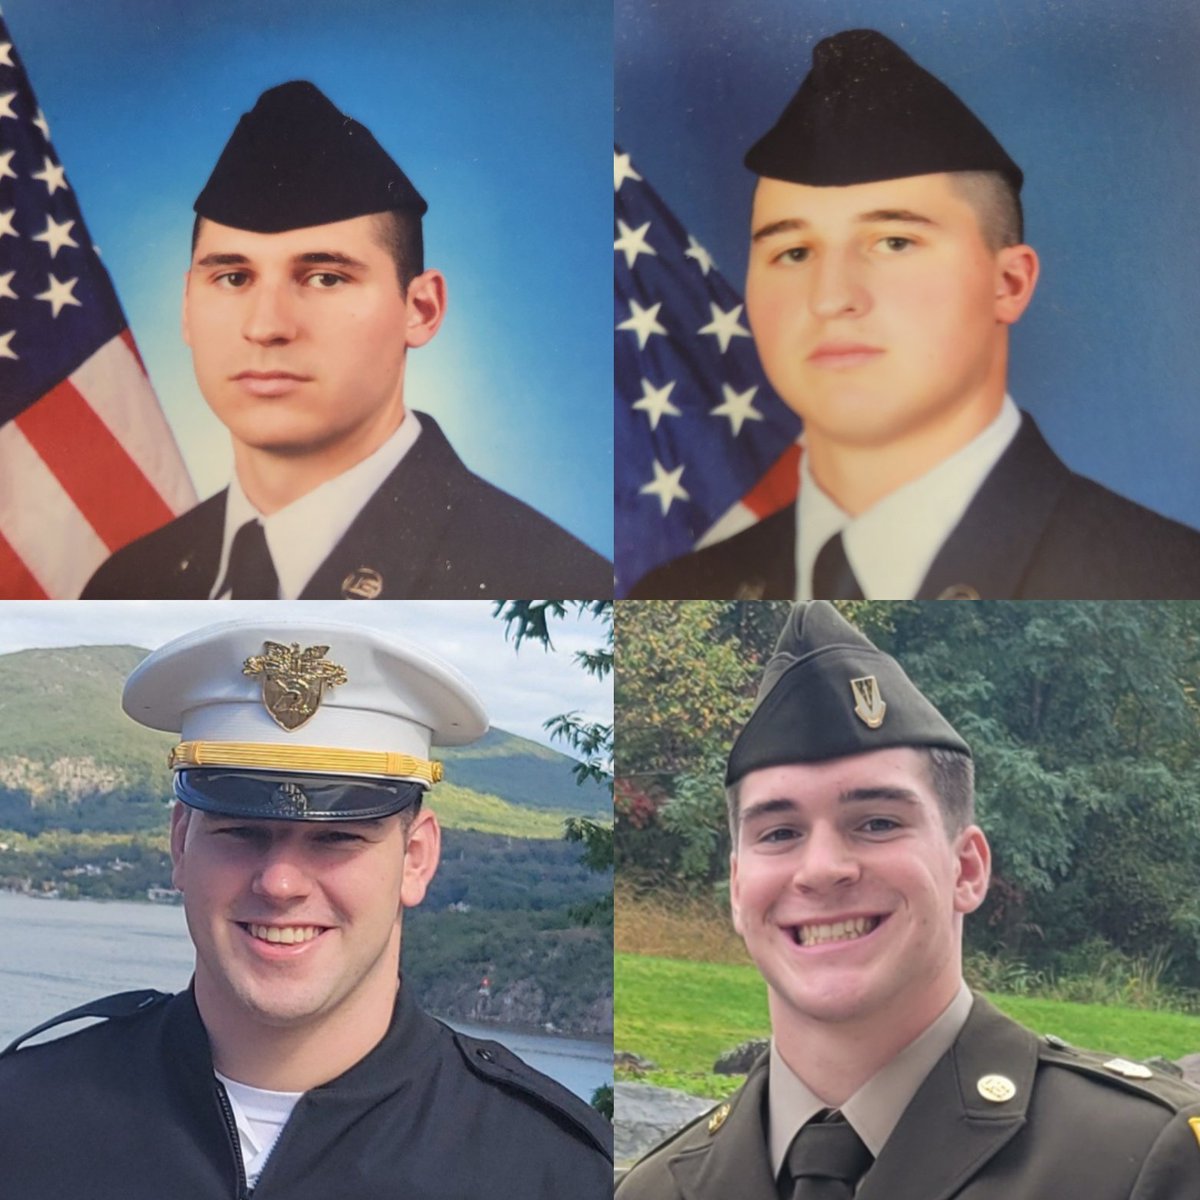 On Veterans Day, I would like to send out my 4 boys who all chose to serve so we can enjoy the freedoms we have. Love you, boys!💙🇺🇲🇺🇲🇺🇲🇺🇲
#GoArmy 
#GoAirforce